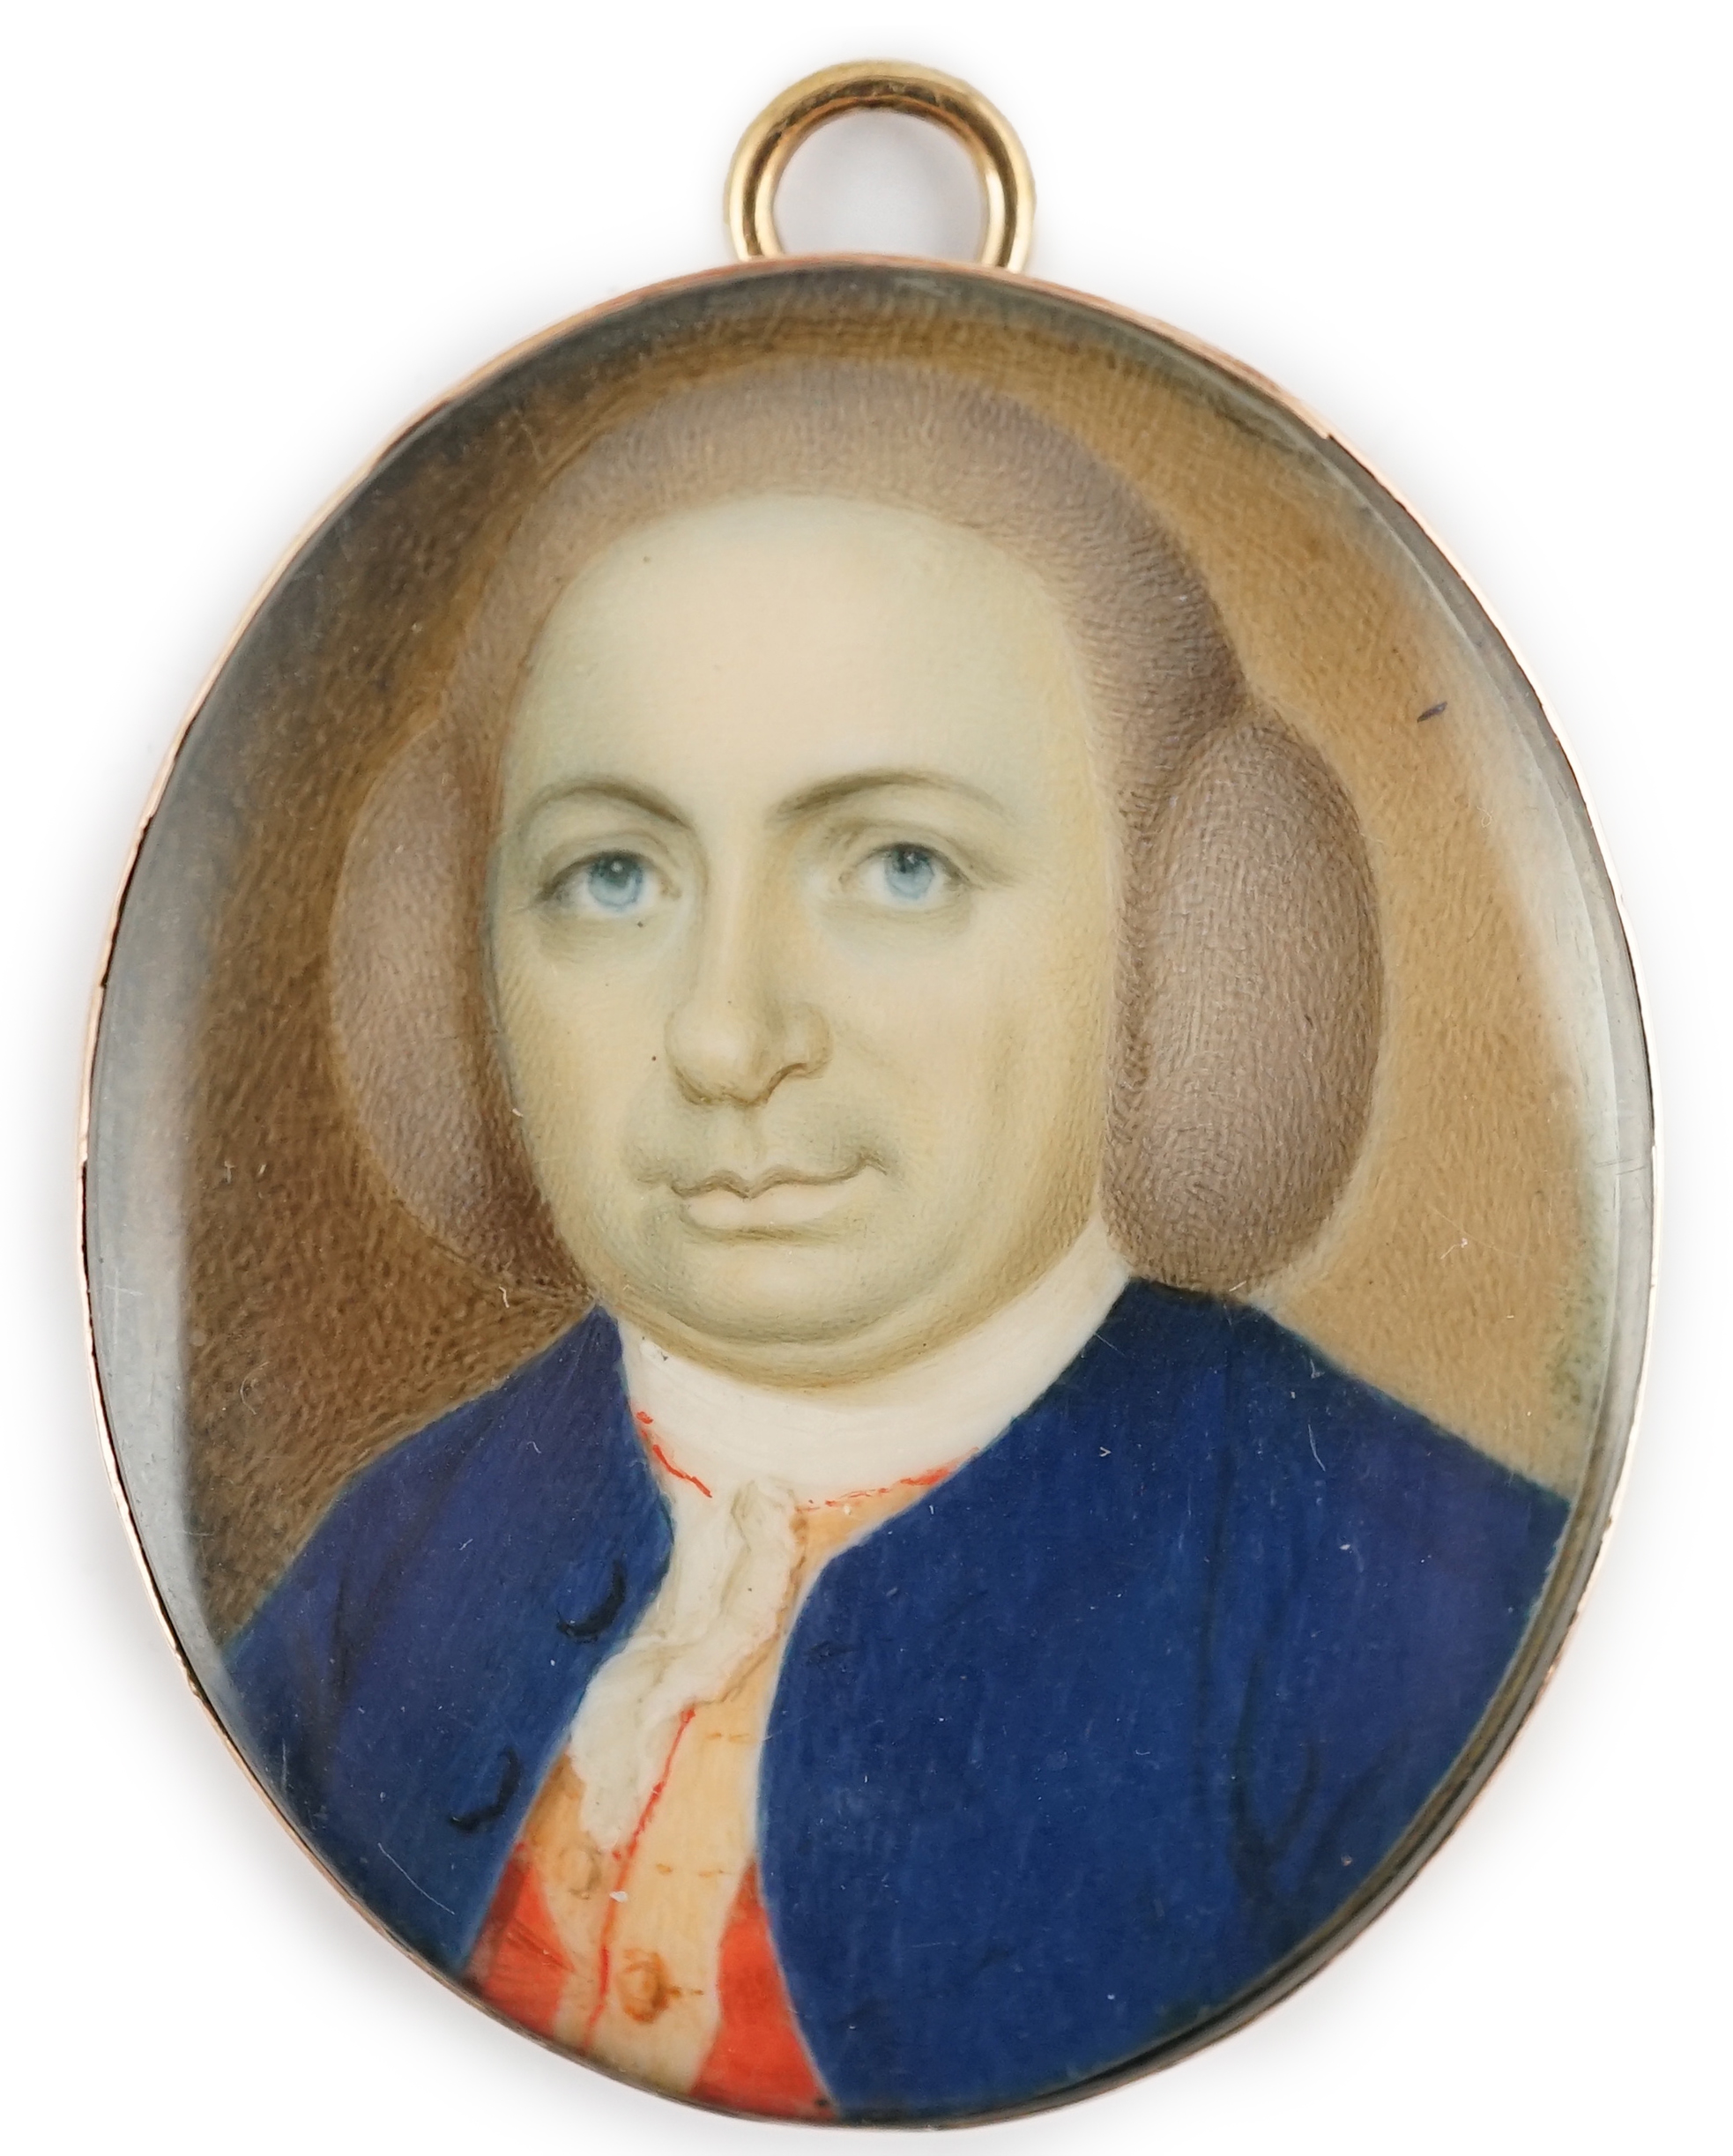 Jeremiah Meyer, R.A. (Anglo-German, 1735-1789), Portrait miniature of a gentleman, oil on ivory, 4 x 3.2cm. CITES Submission reference YZCZ4G62